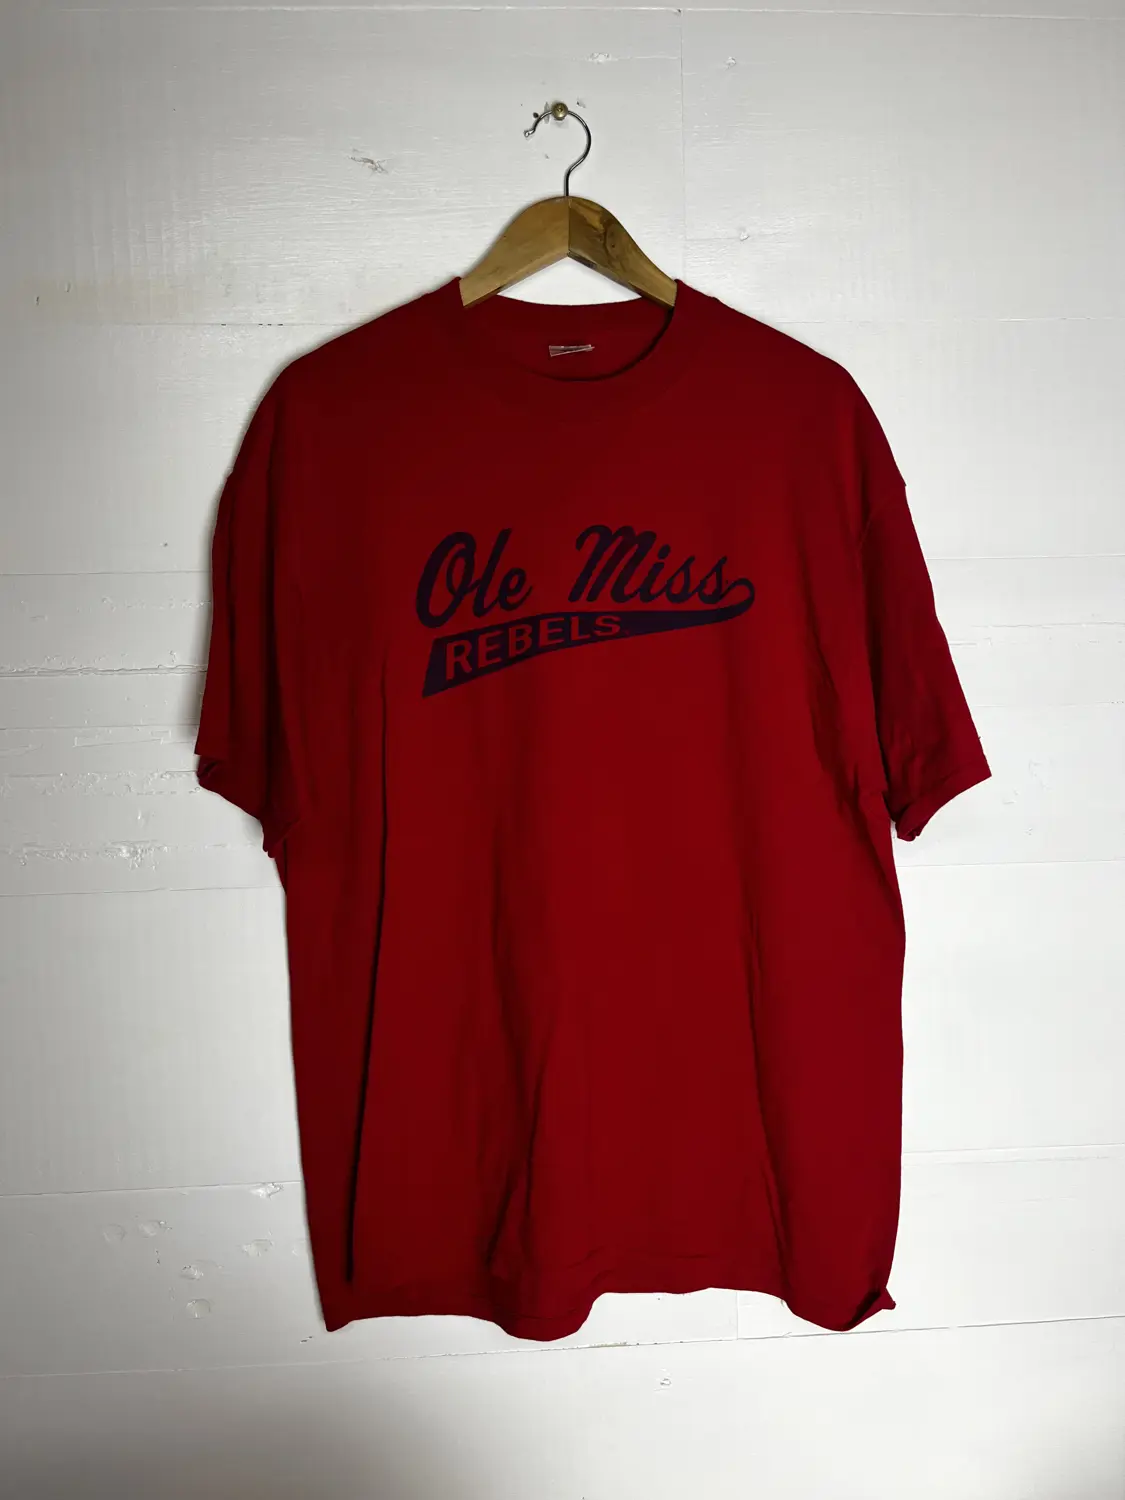 (XL) Red Ole Miss Rebels tee